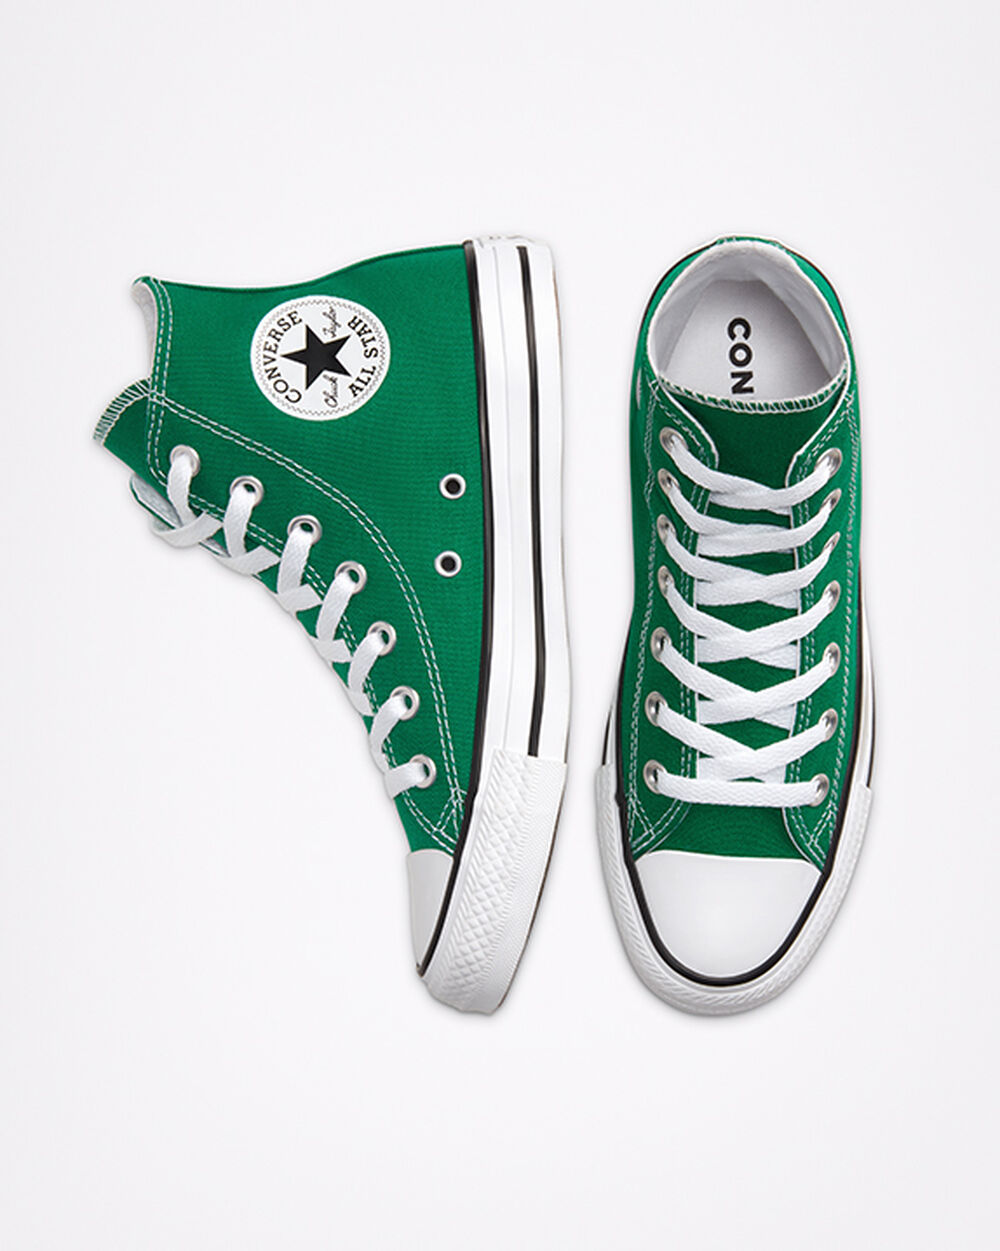 Tenis Converse Chuck Taylor All Star Mujer Verdes Blancos | Mexico-421066